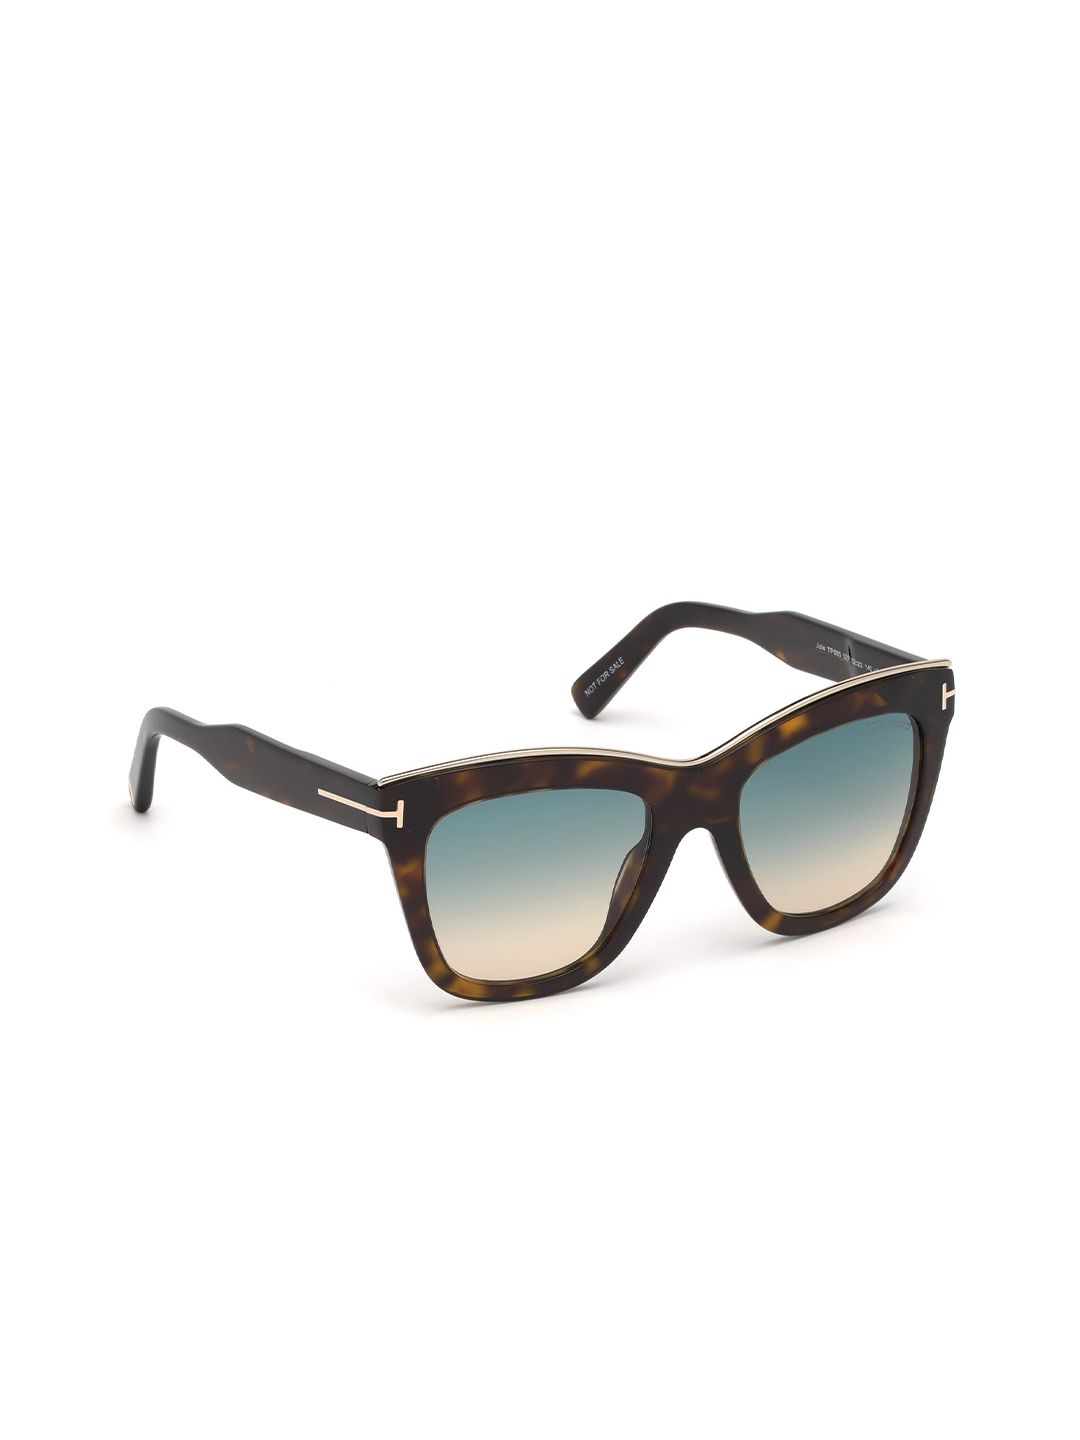 Tom Ford Women Green Square Sunglasses With UV Protected Lens Price in India